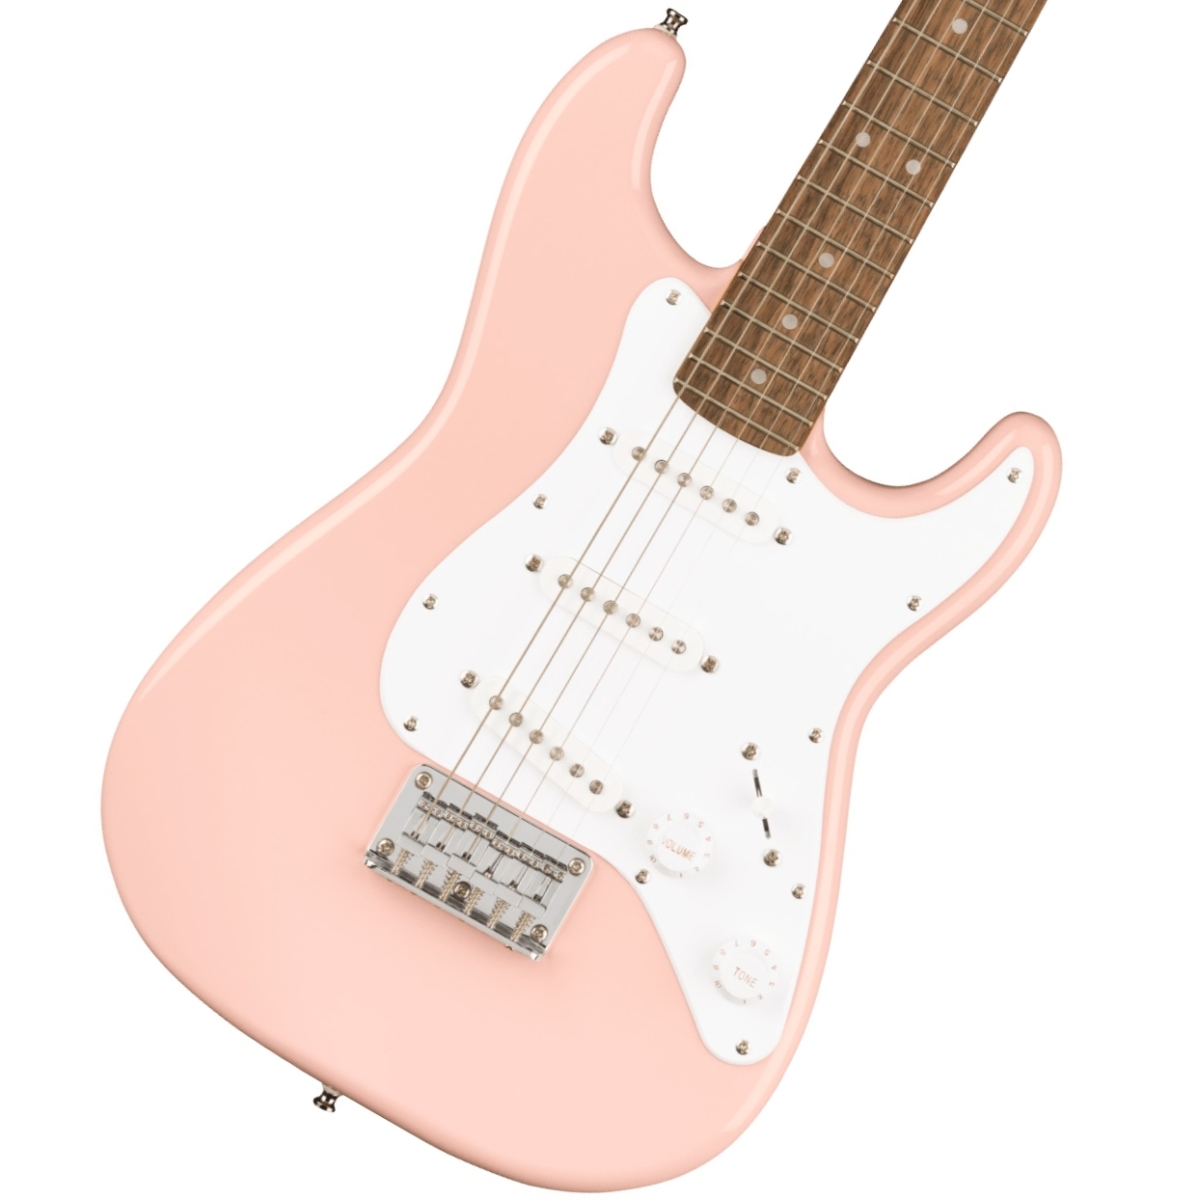 Squier by Fender Mini Stratocaster Laurel Fingerboard Shell Pink スクワイヤー  ミニエレキギター イシバシ楽器